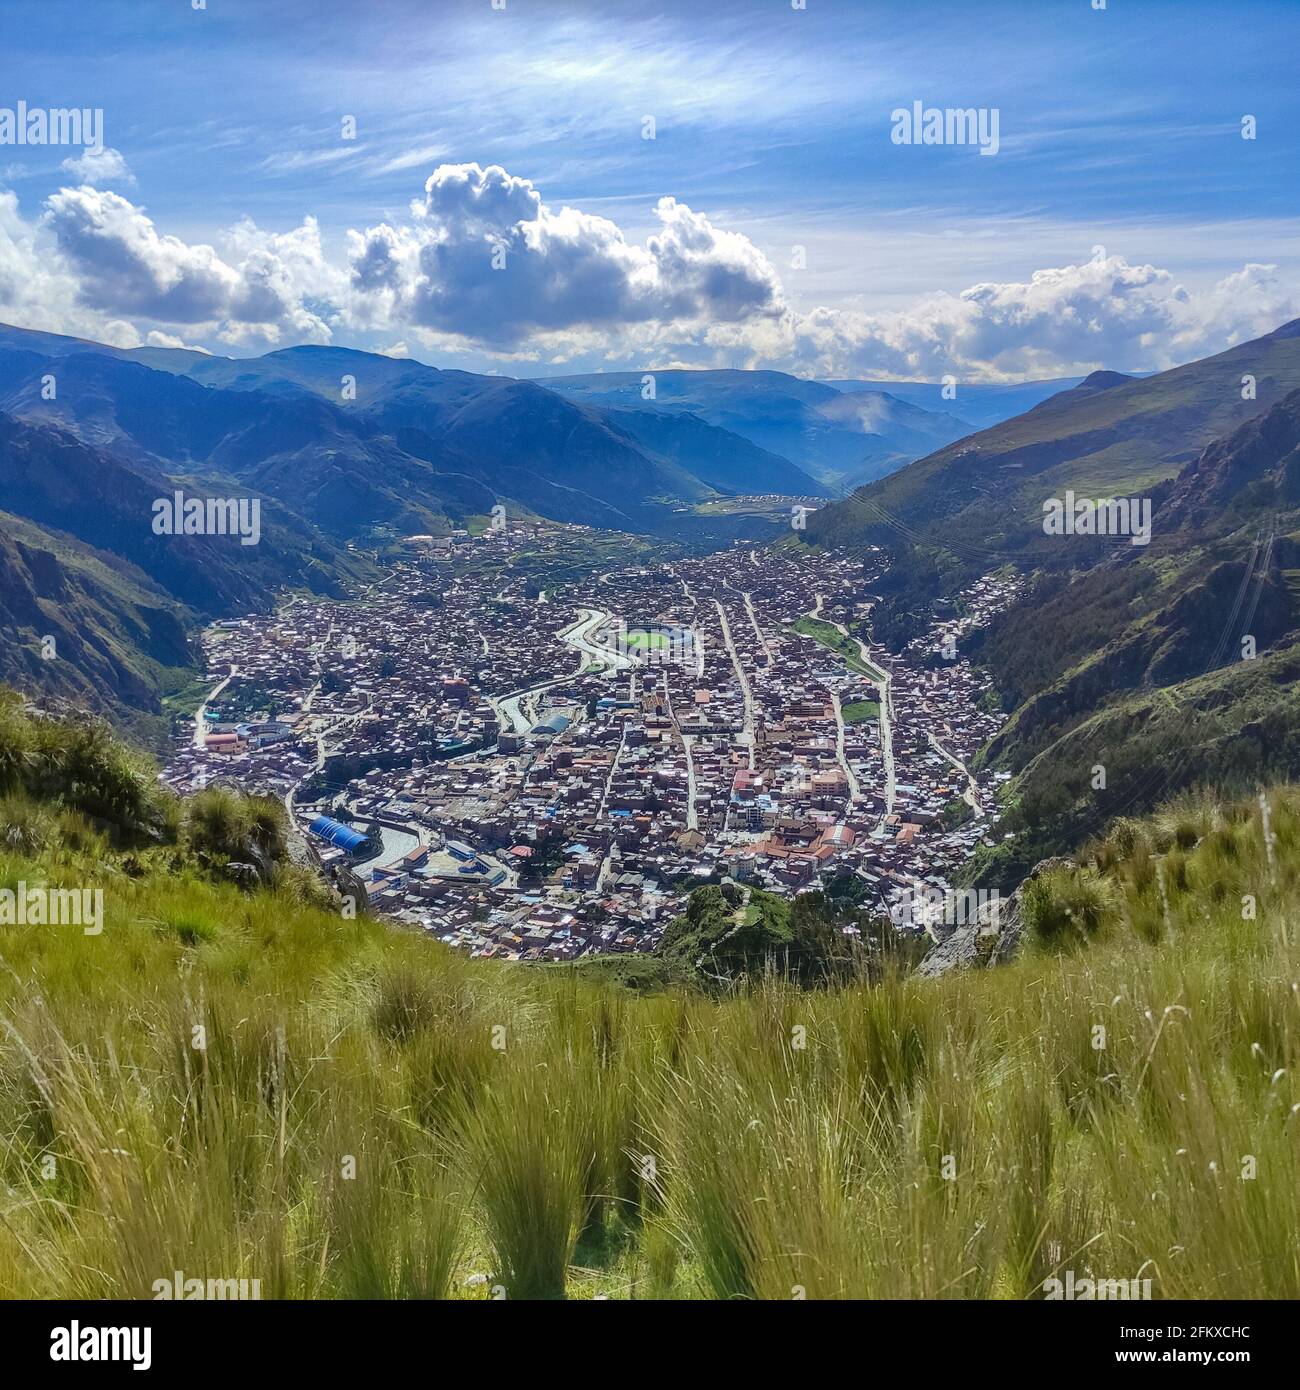 View of the city of Huancavelica in Peru from a mountain Stock Photo